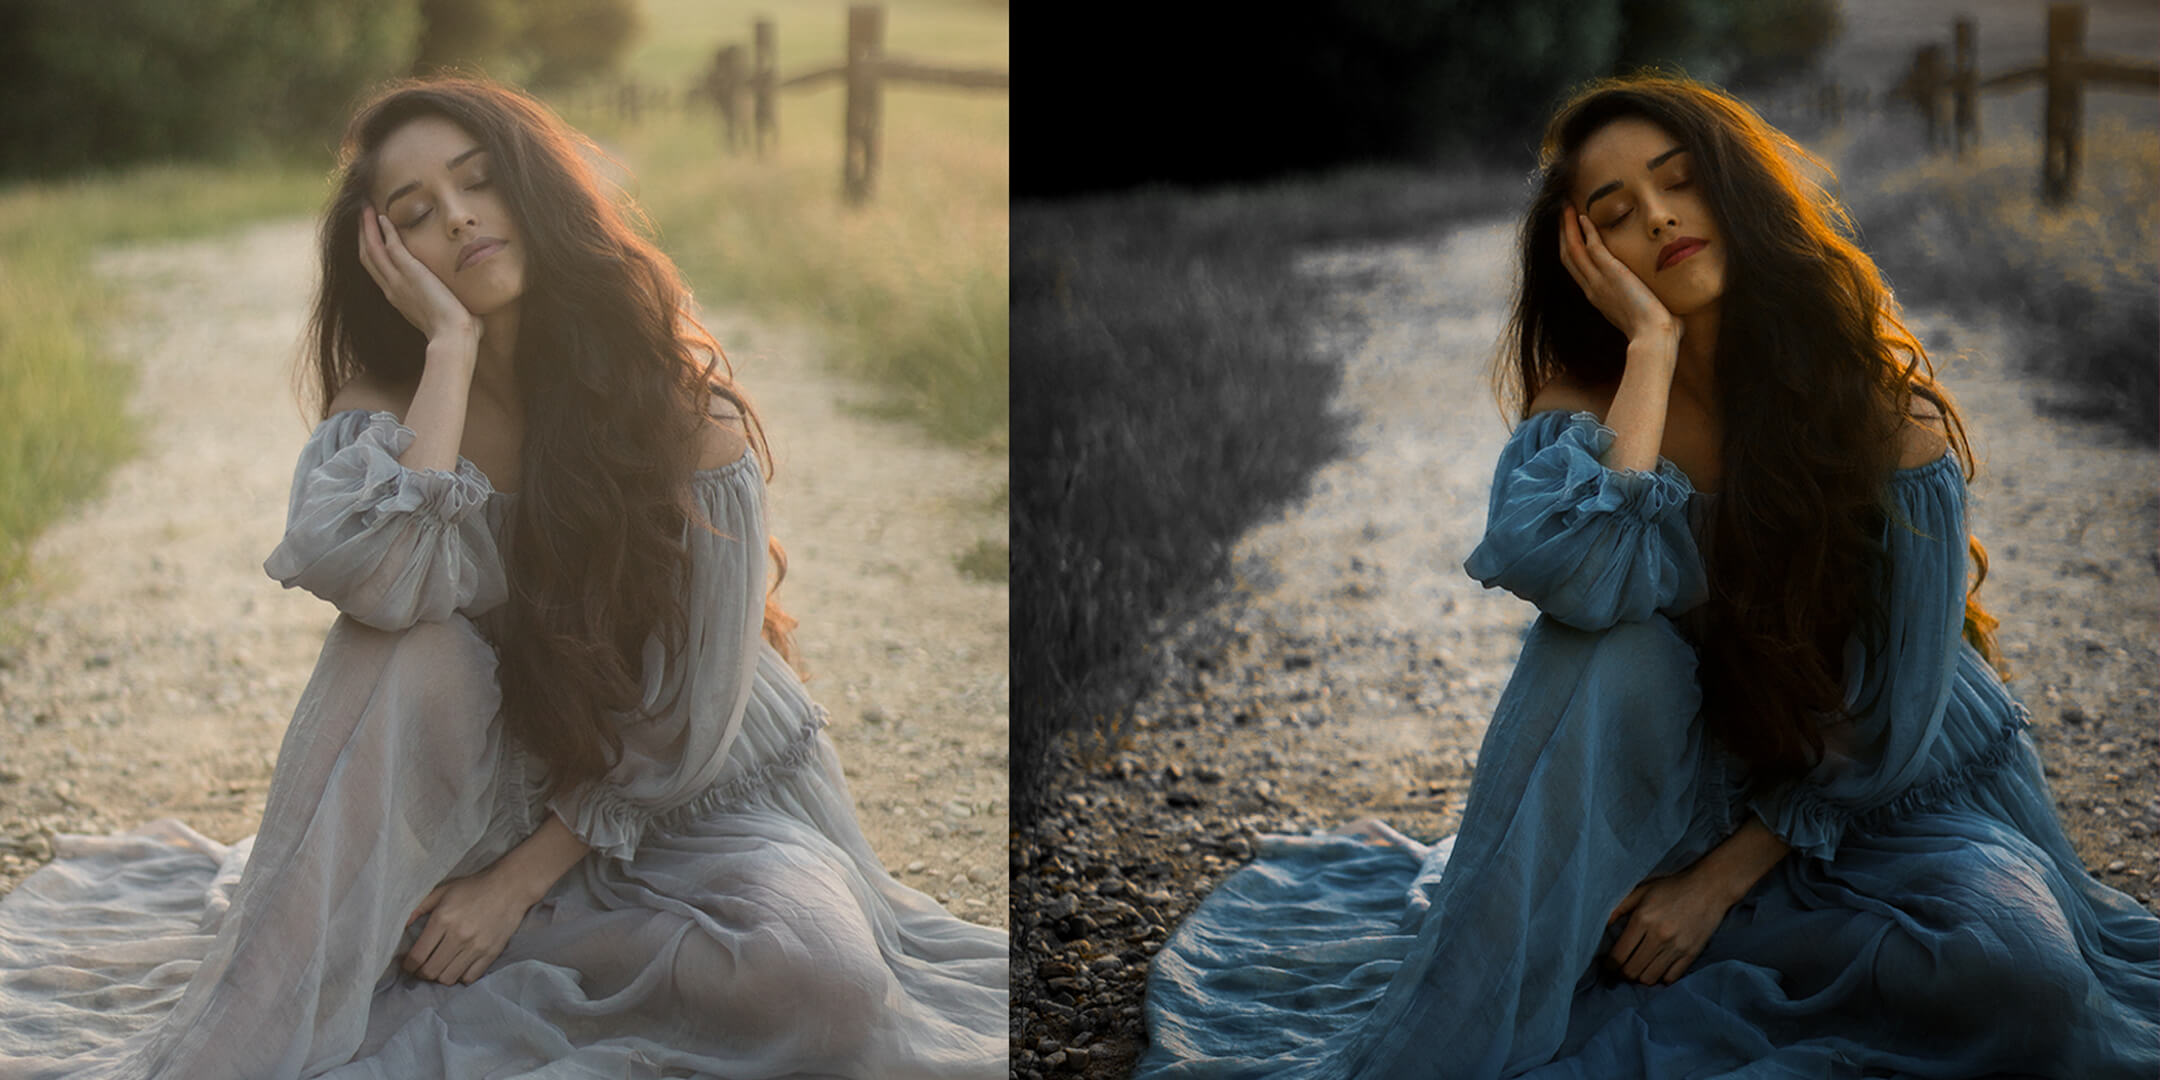 professional image retouching services